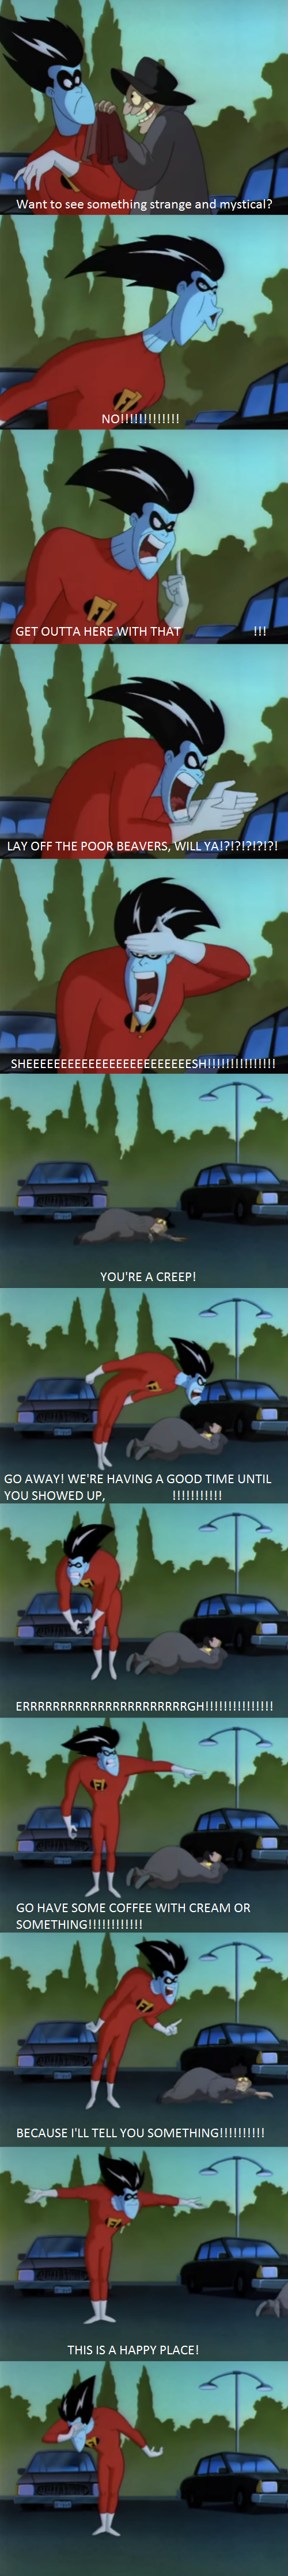 Freakazoid Know How To Deal With Creeps Blank Meme Template